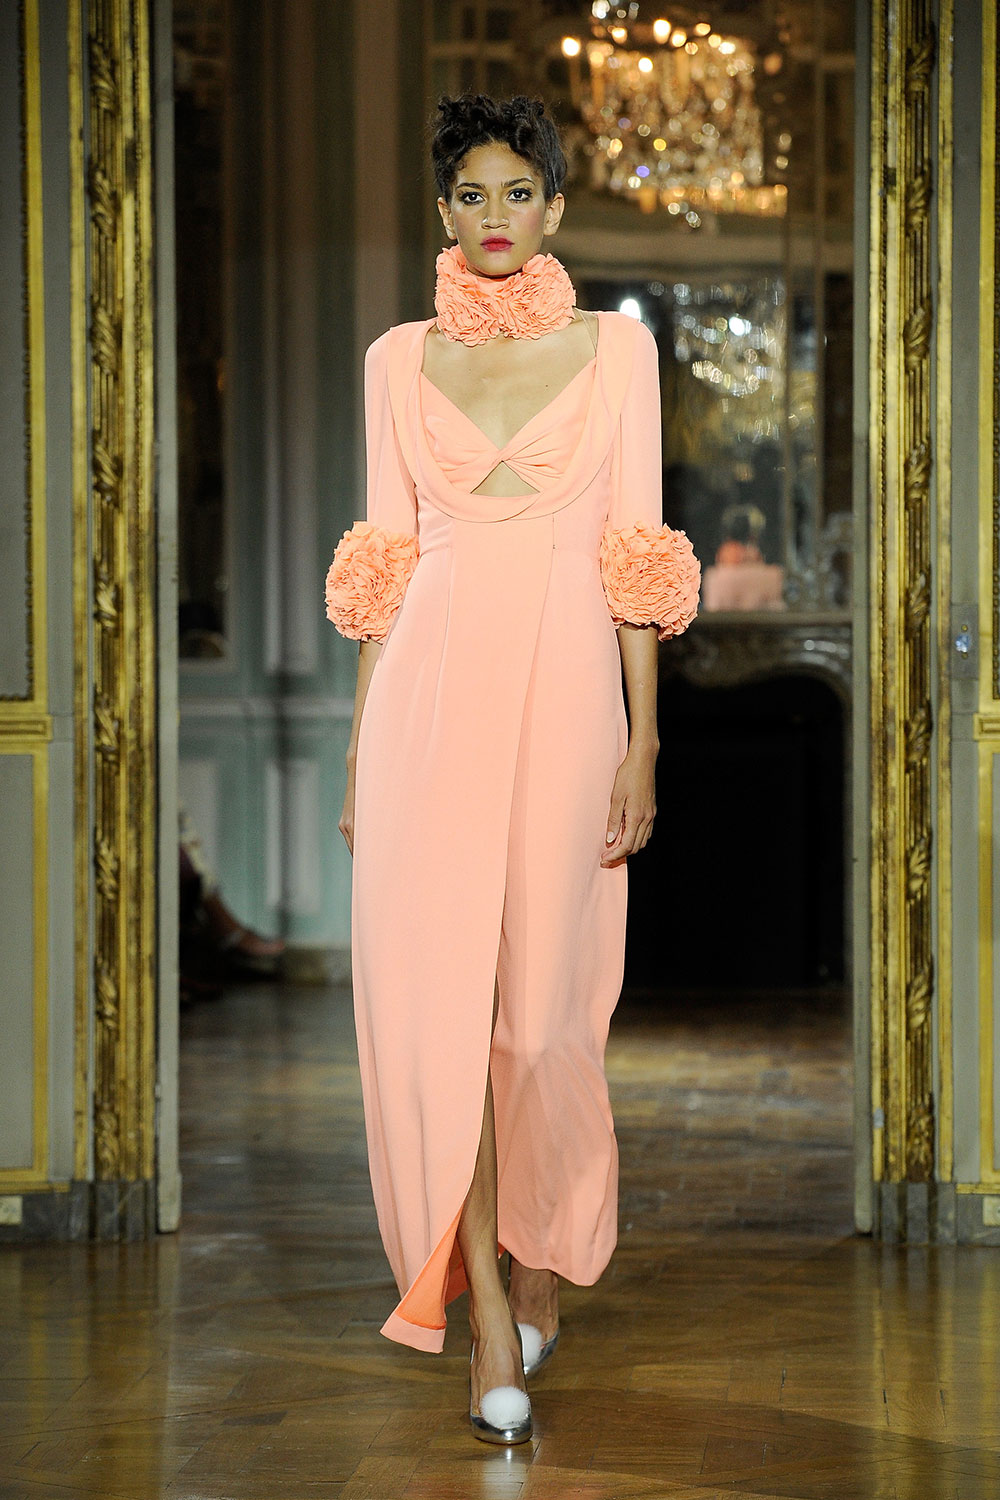 Look 35 from the Ulyana Sergeenko show at Paris Fashion Week Haute Couture FW 2015/2016. Photo / Getty Images